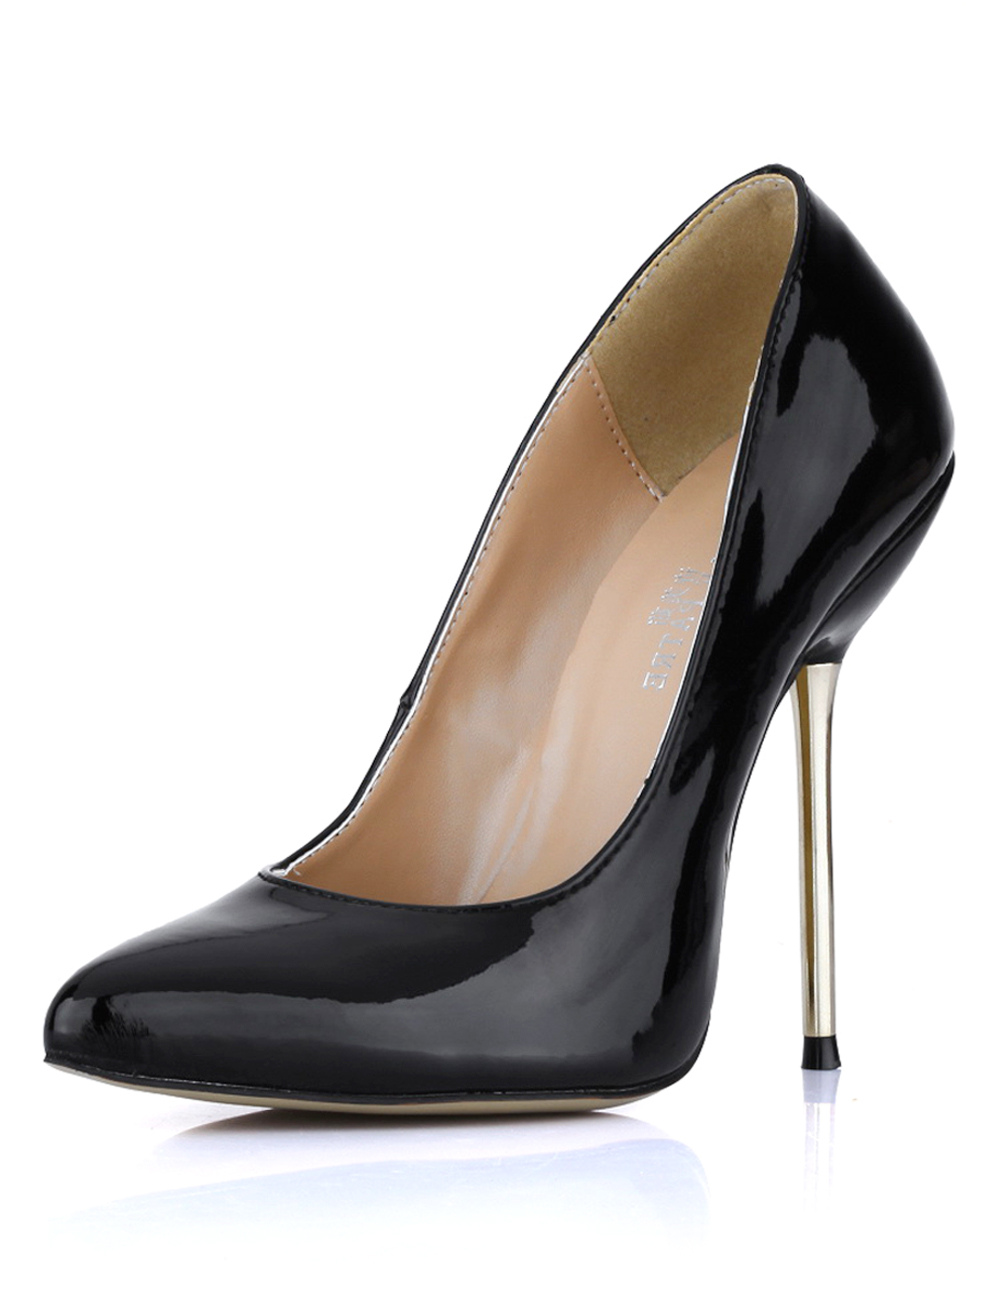 Sexy Black Pointed Toe Stiletto Heel Patent Leather Woman's High Heels ...